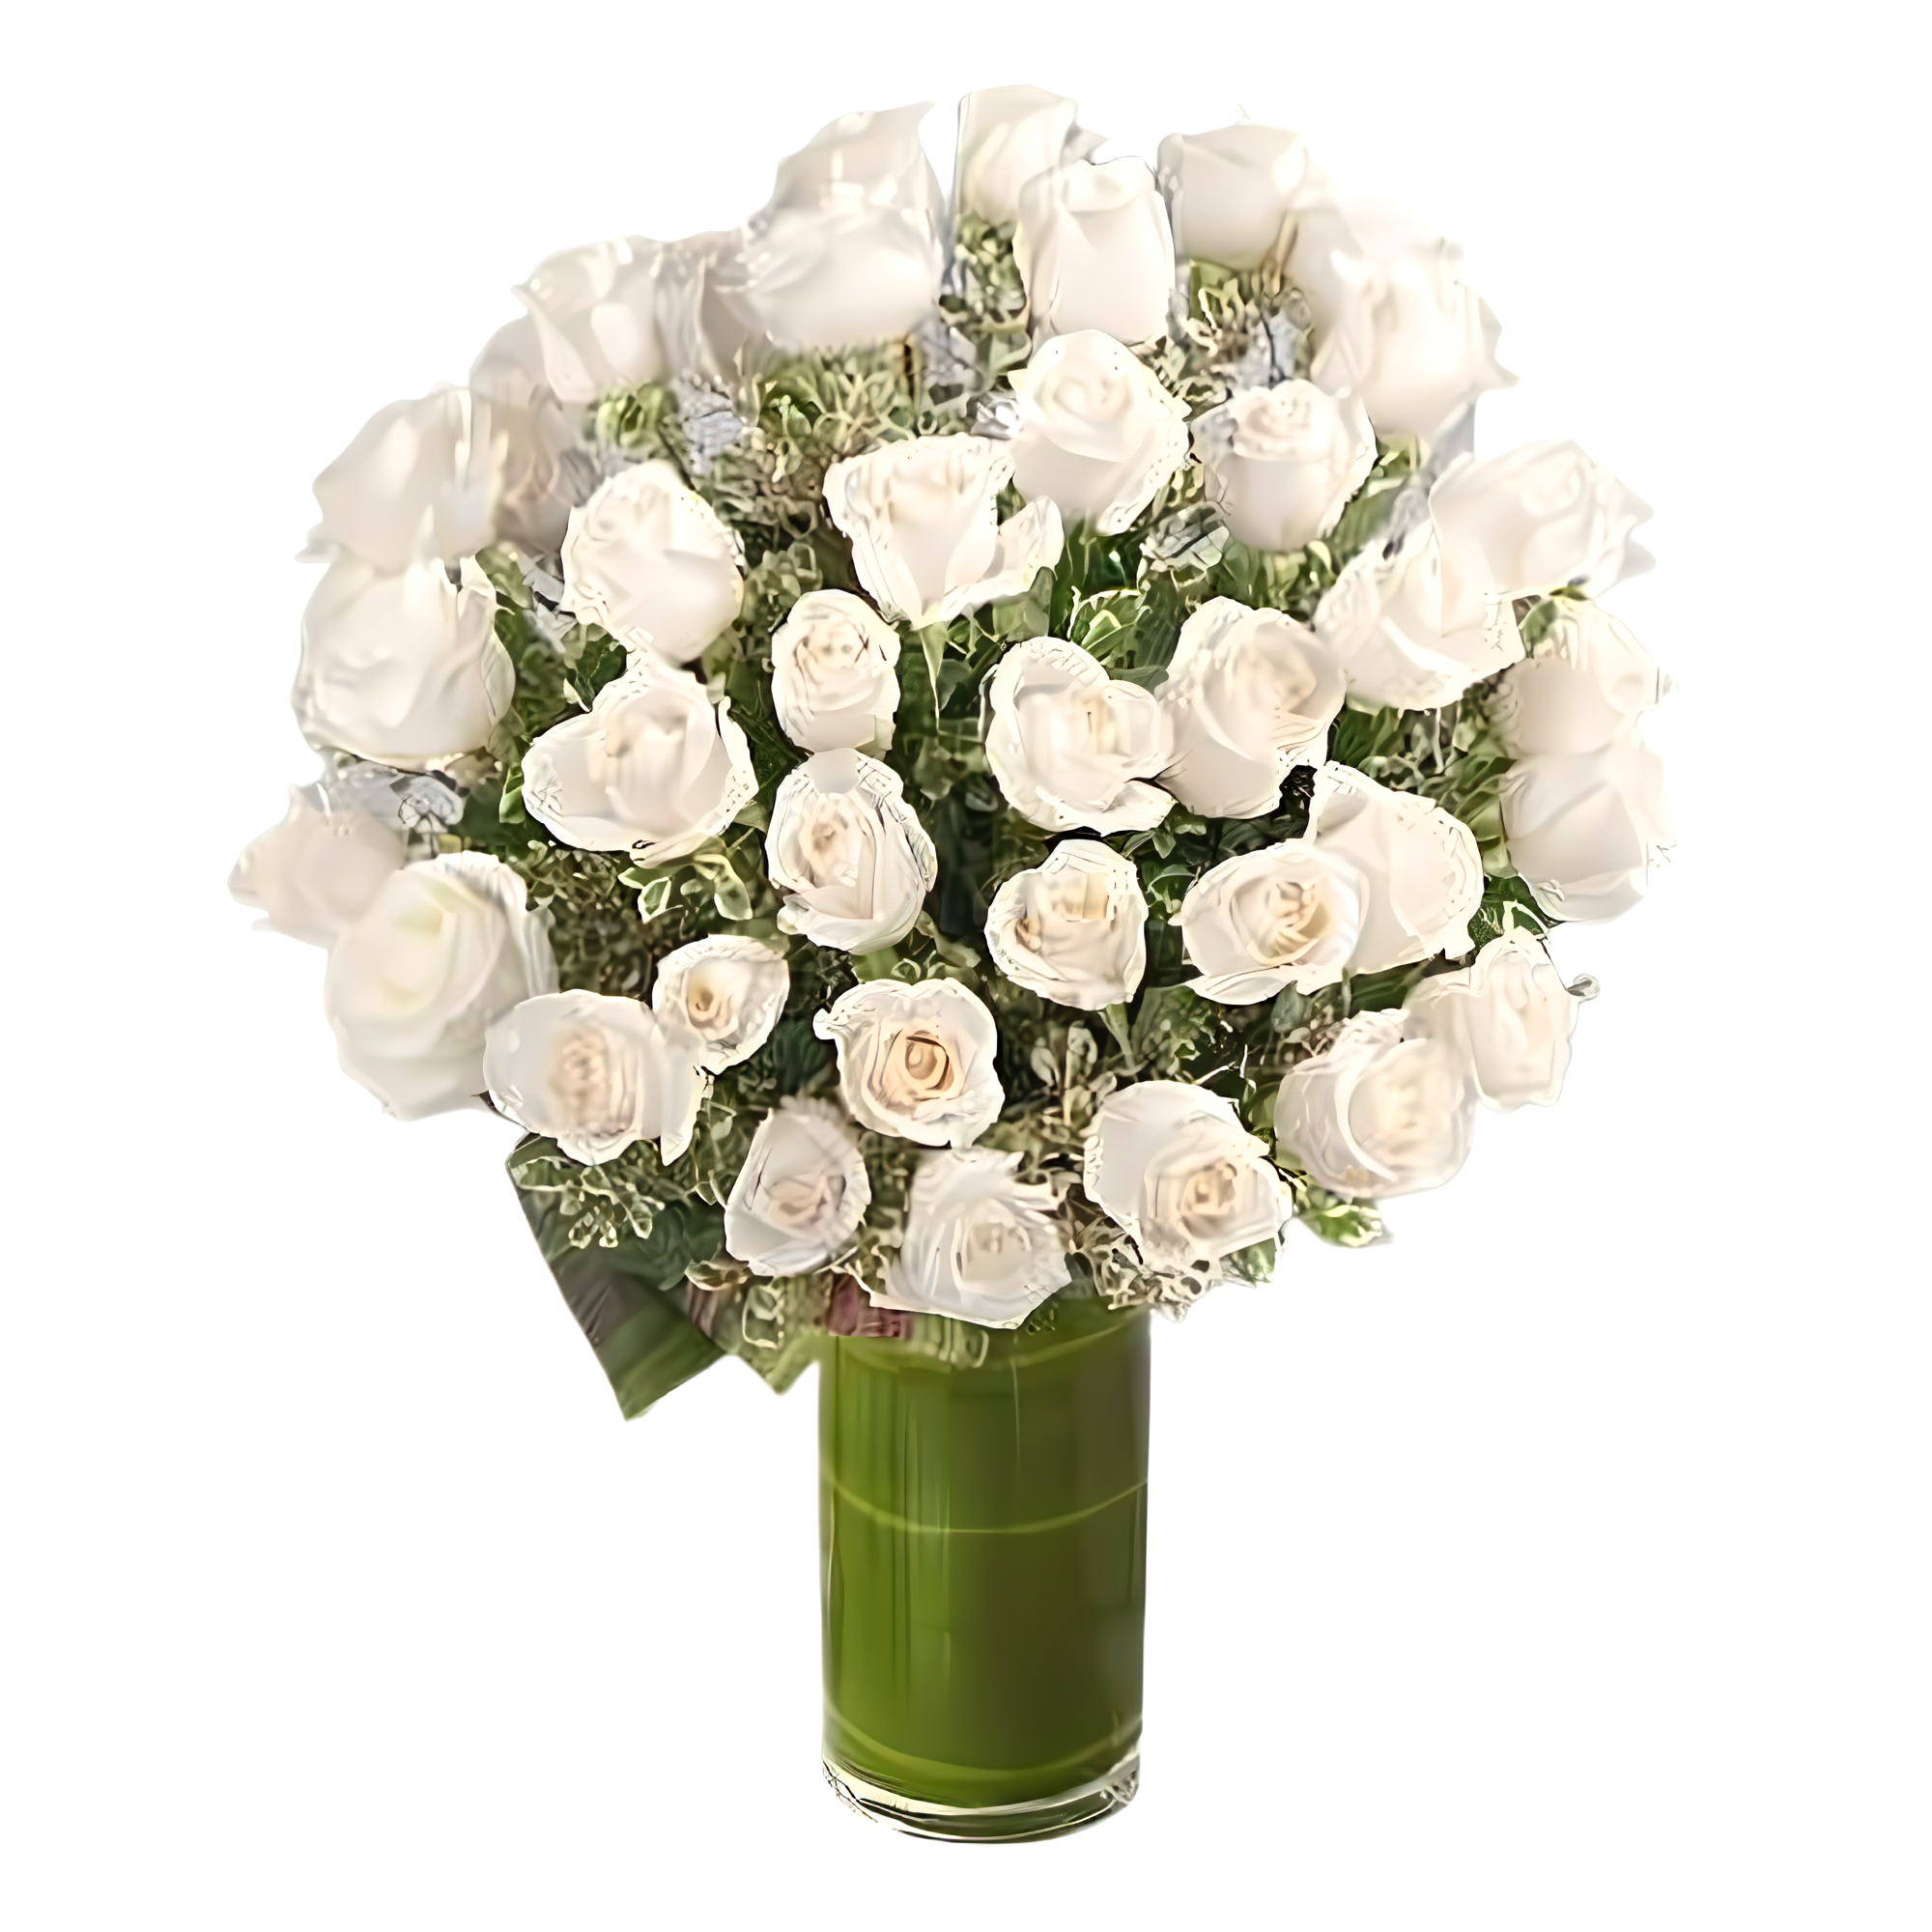 Luxury Rose Bouquet - 48 Premium White Long Stem Roses - Products > Luxury Collection